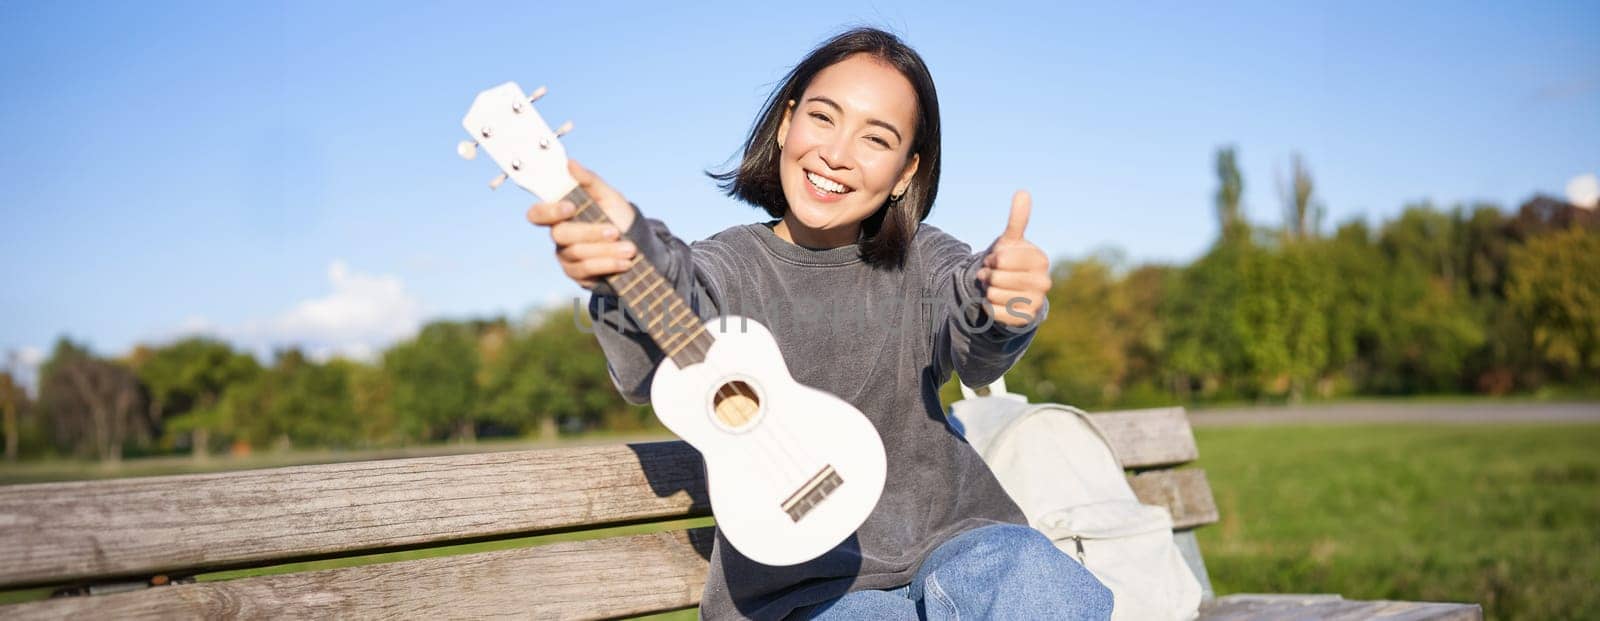 Happy asian girl shows ukulele and thumbs up, demonstrates her new musical instrument, learns how to play in park, sits on bench. Copy space